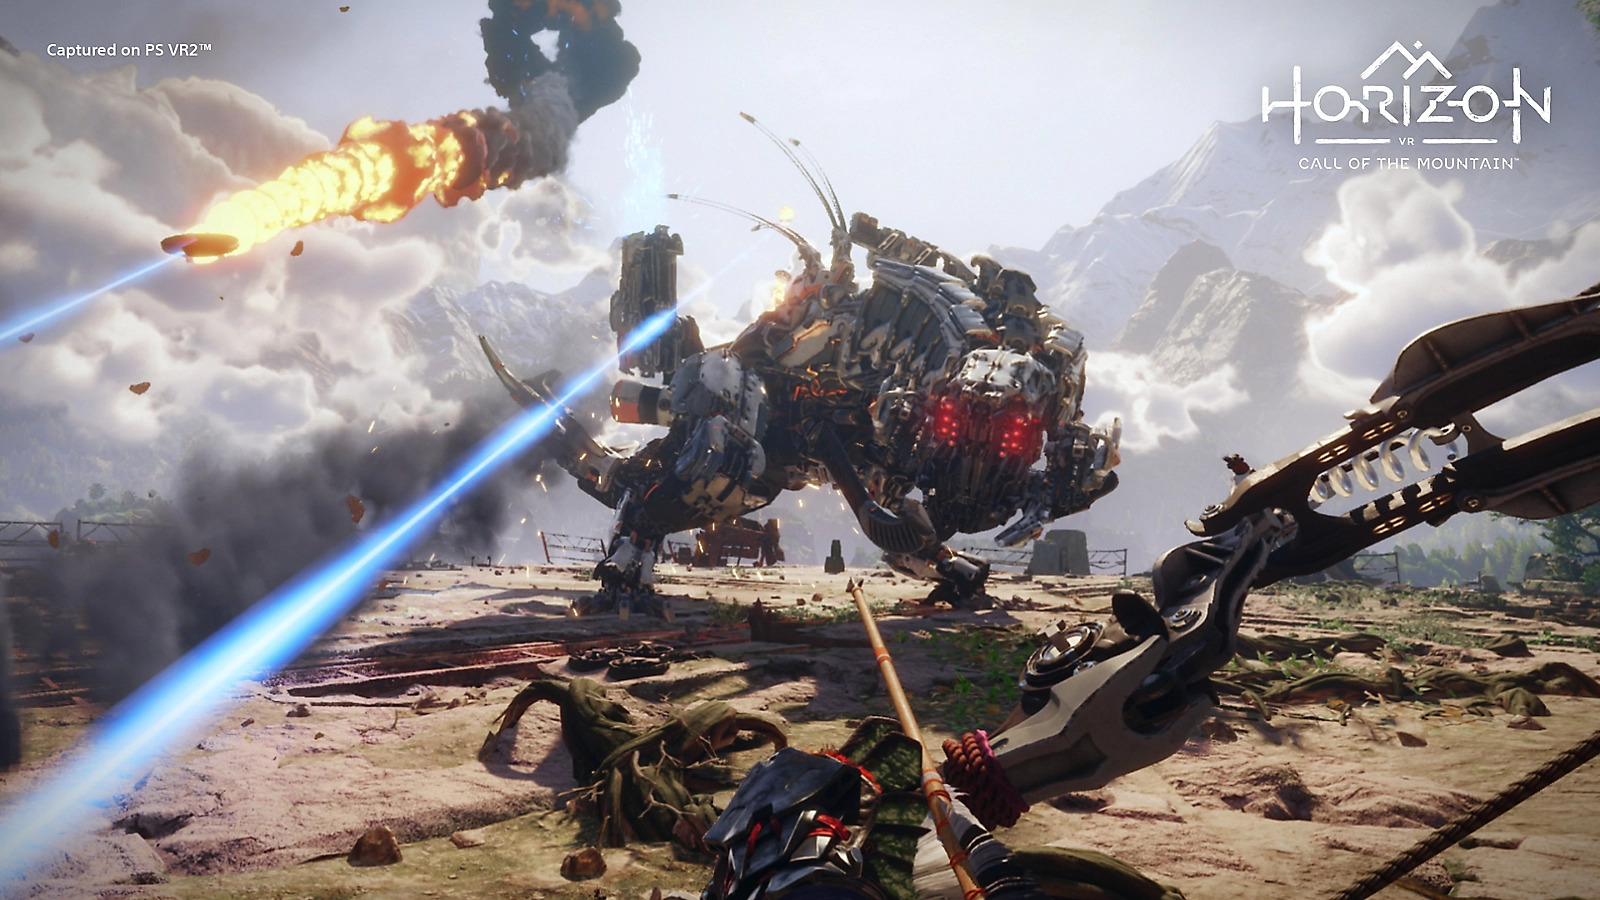 First-person in-game view of a player readying their bow-and-arrow to fire at a huge “Thunderjaw” which is a machine-like dinosaur